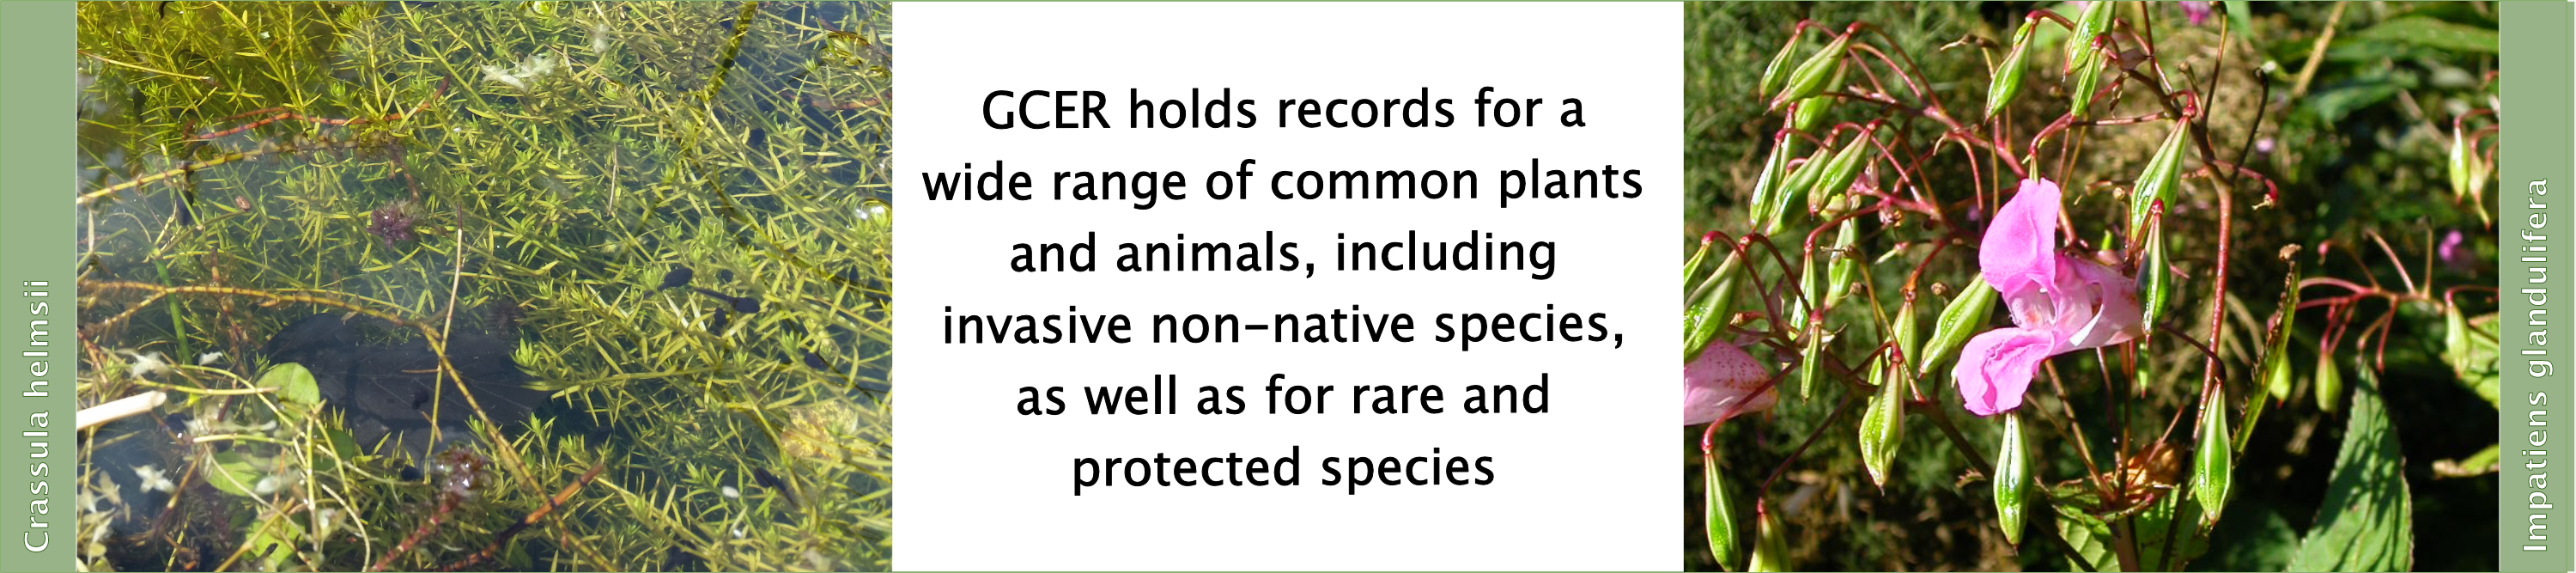 New Zealand Pigmyweed and Himalayan balsam images: GCER keeps records of invasive species as well as protected rarities